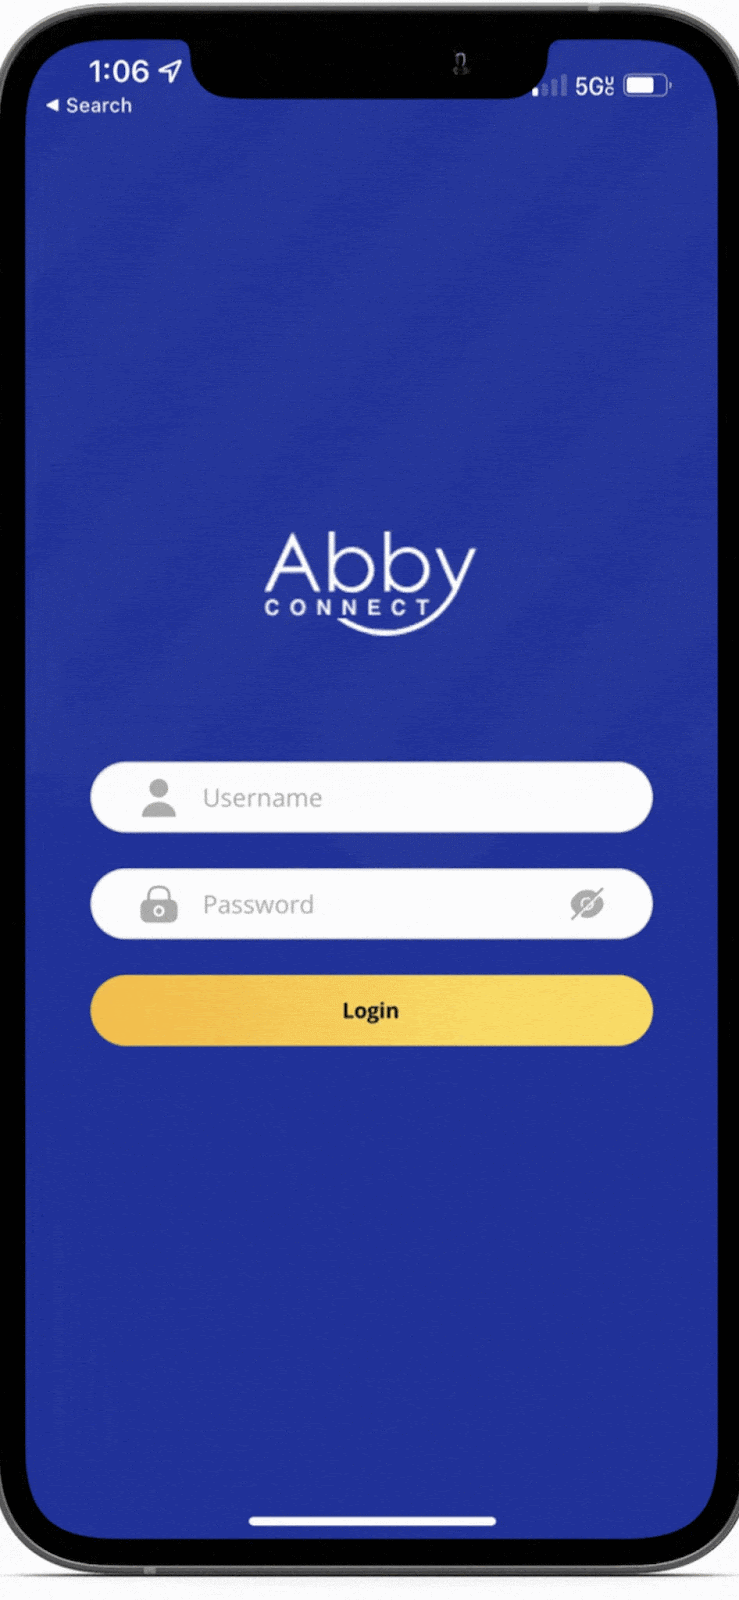 A GIF showing Abby Connect’s mobile app features, including the login page, account details, dashboard, activities, and dial pad